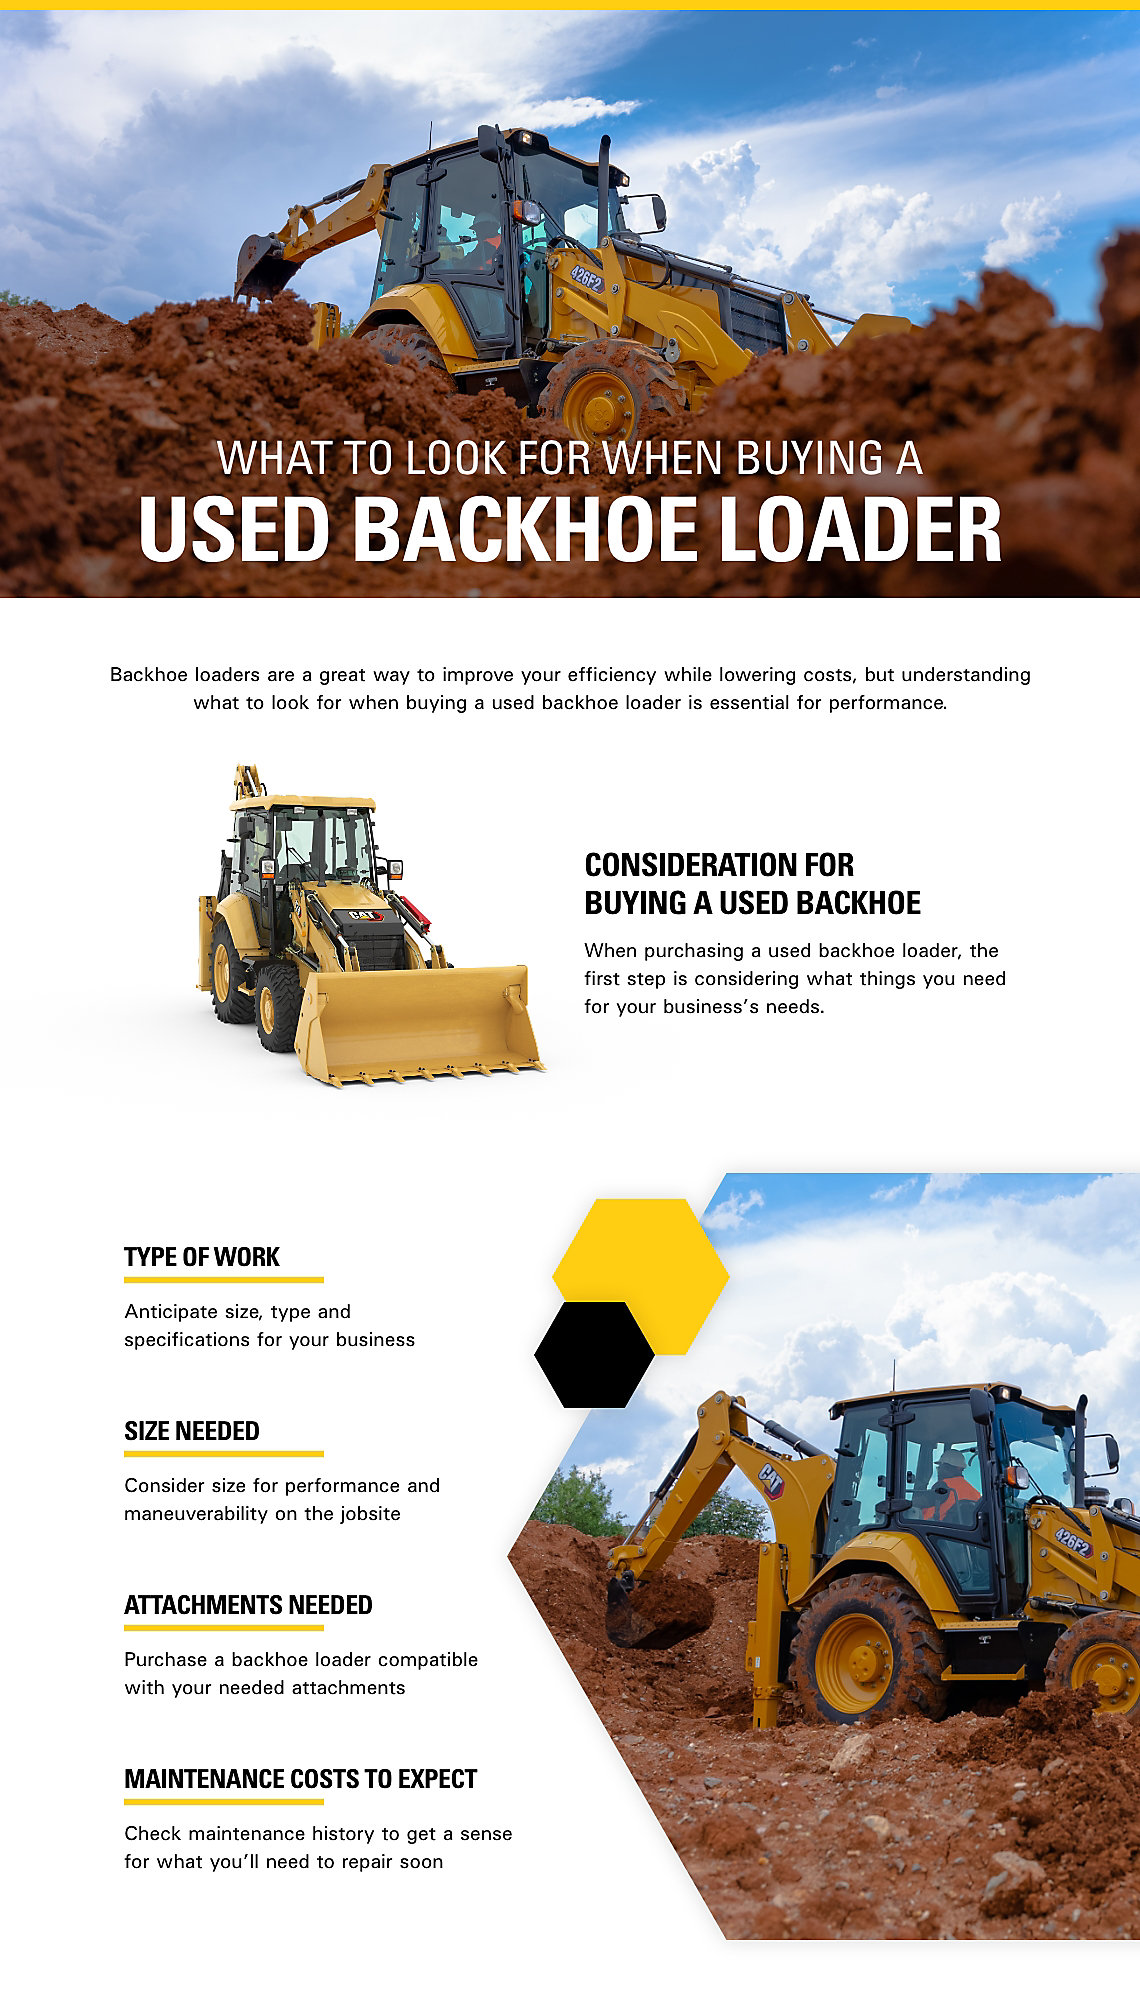 What to Look For When Buying a Used Backhoe Loader